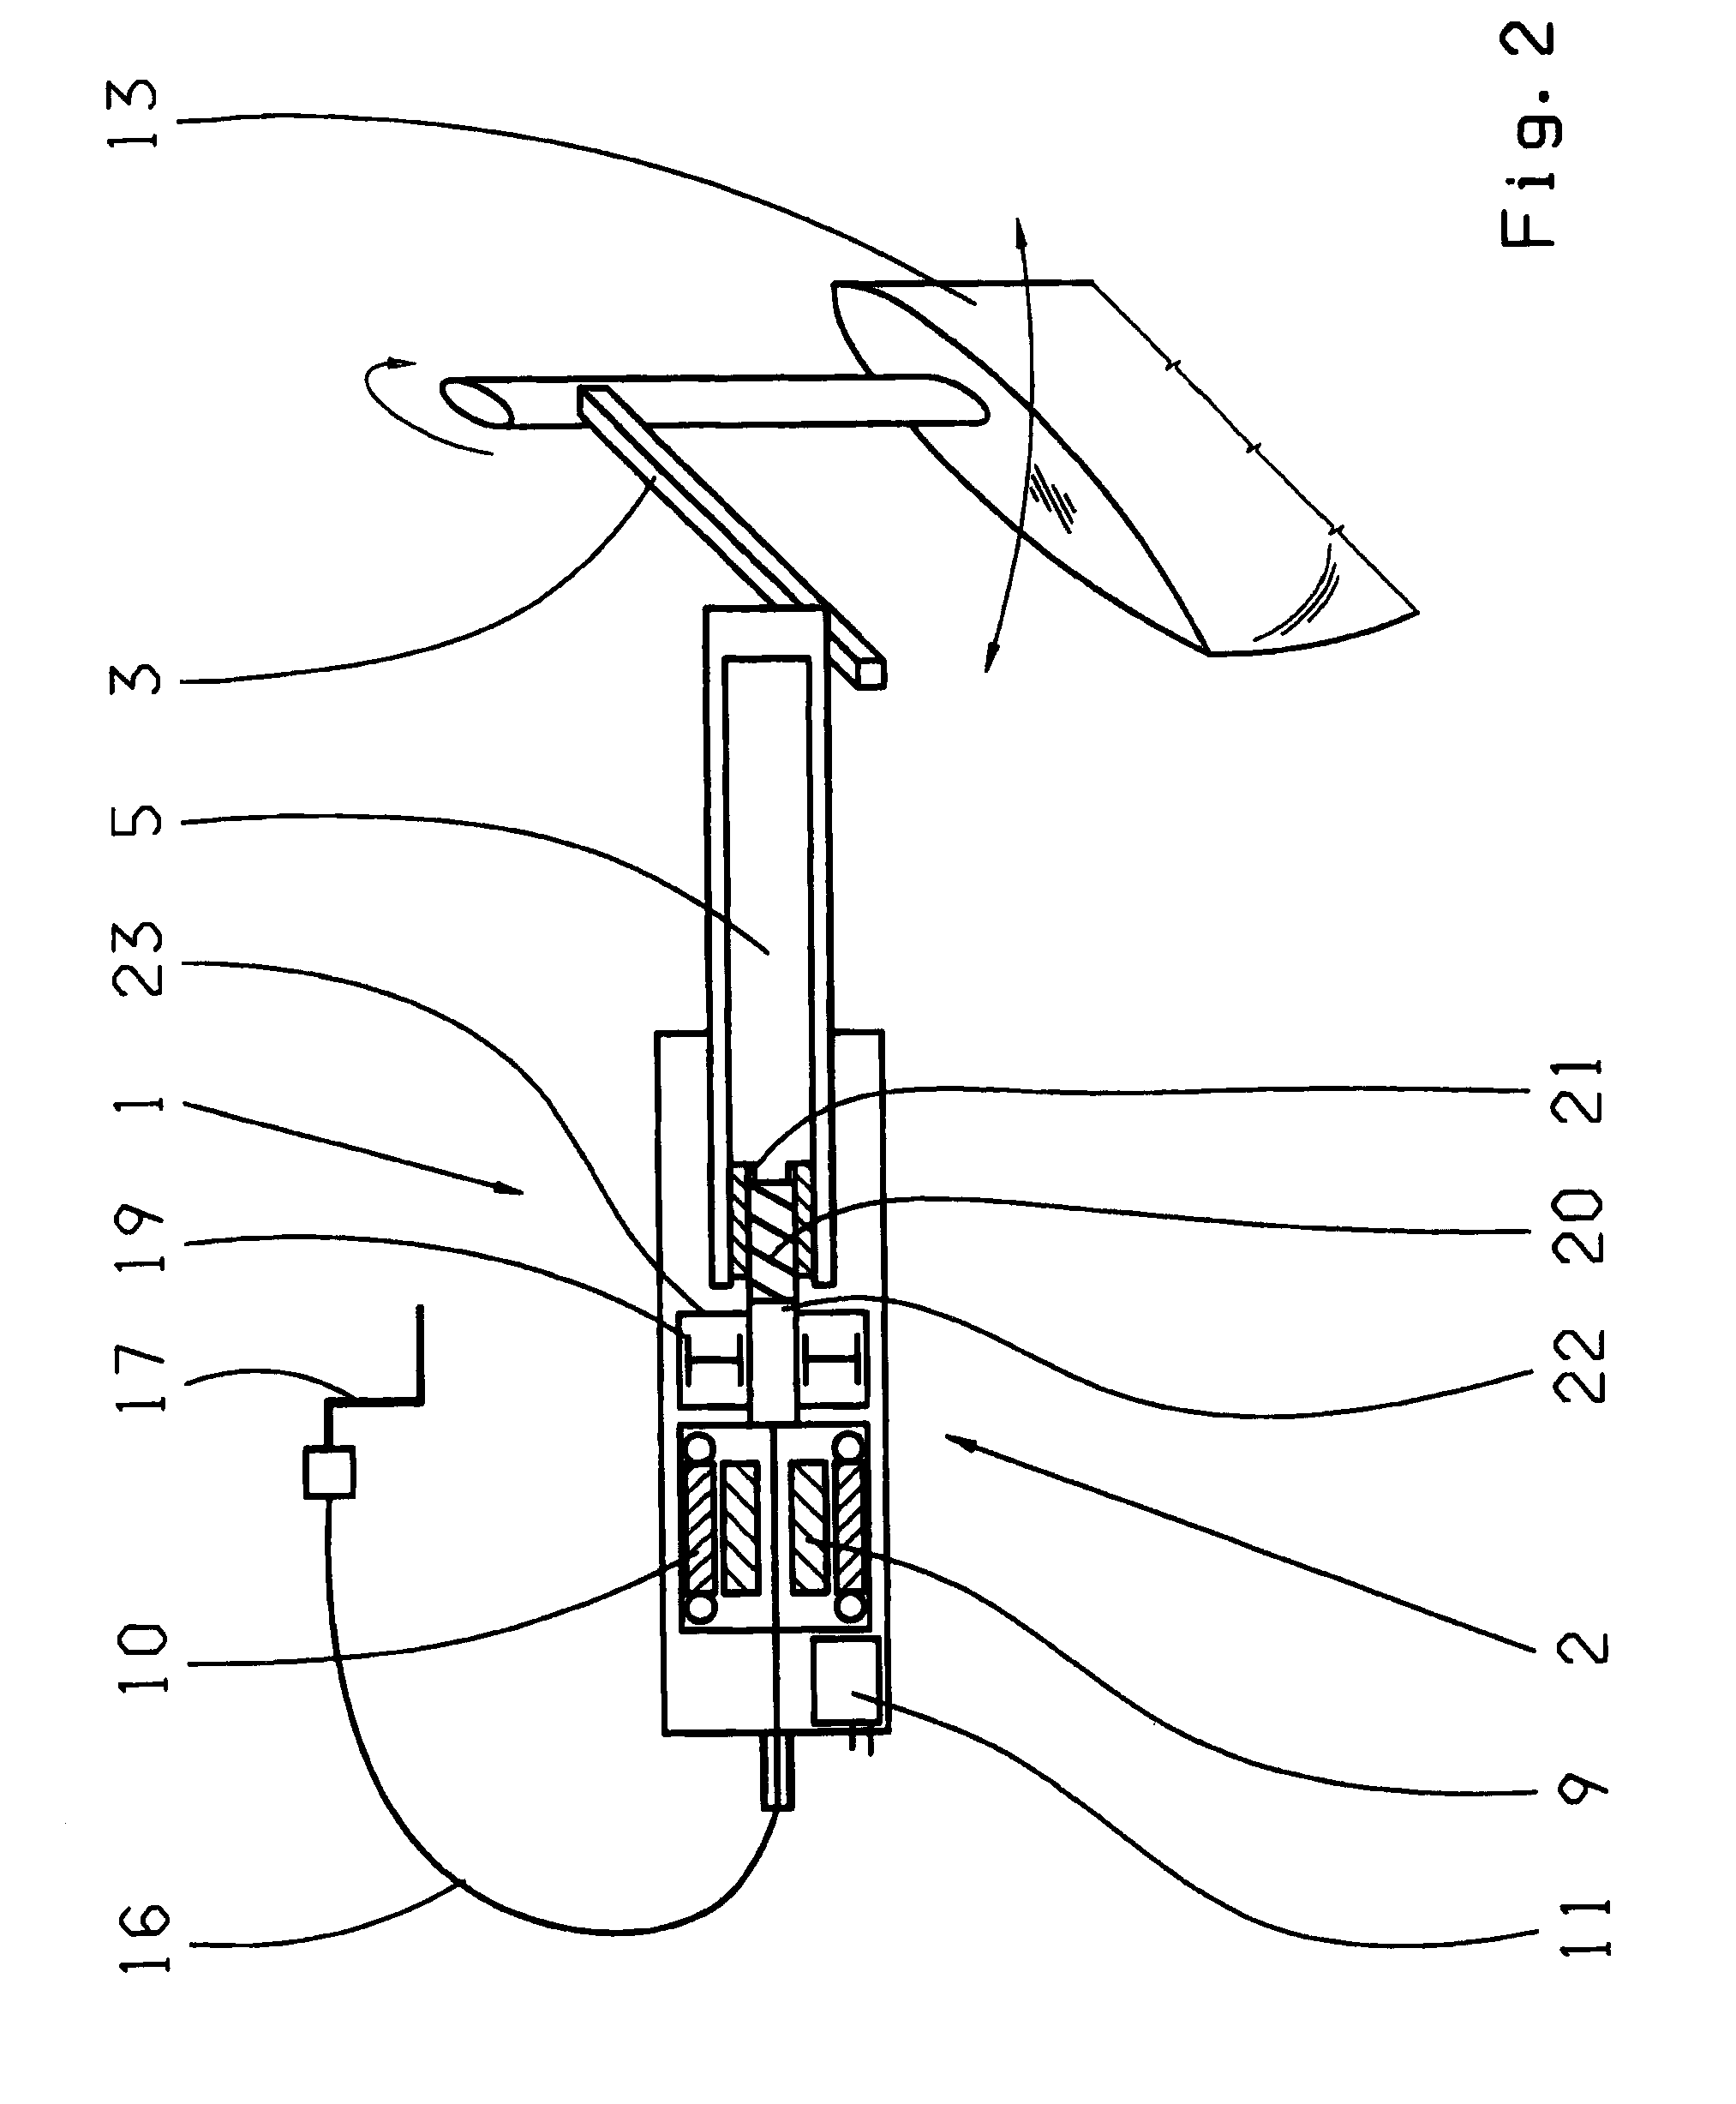 Steering actuator for a steer-by-wire ship's control system and method for operating said steering actuator